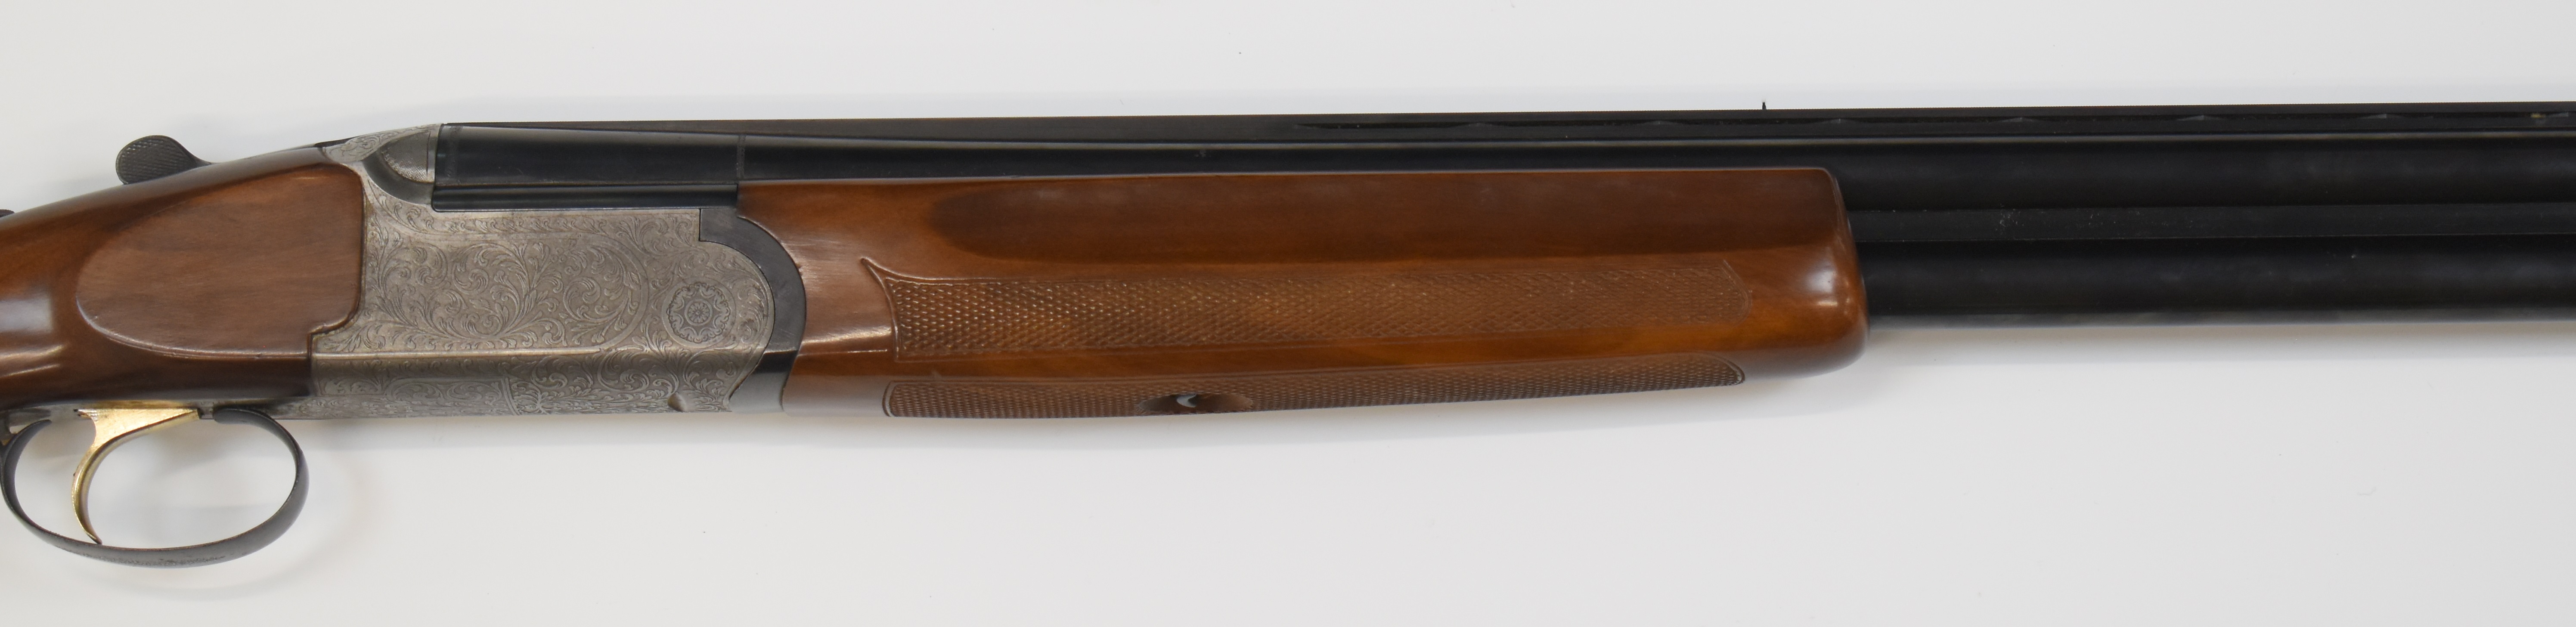 Sabatti 12 bore over under ejector shotgun with engraved lock, underside, top plate, trigger guard - Image 4 of 10